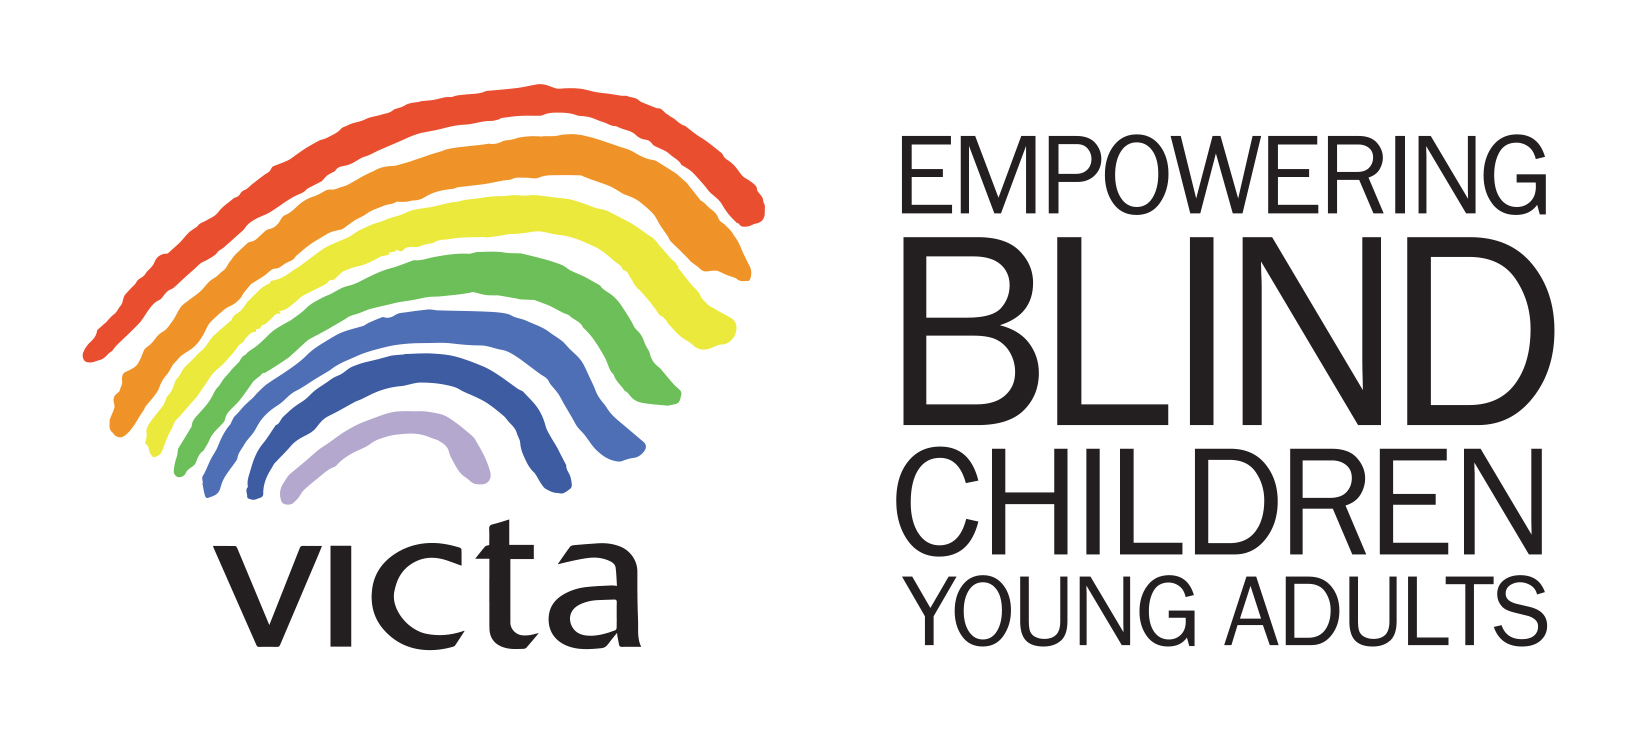 Victa empowering blind children young adults logo